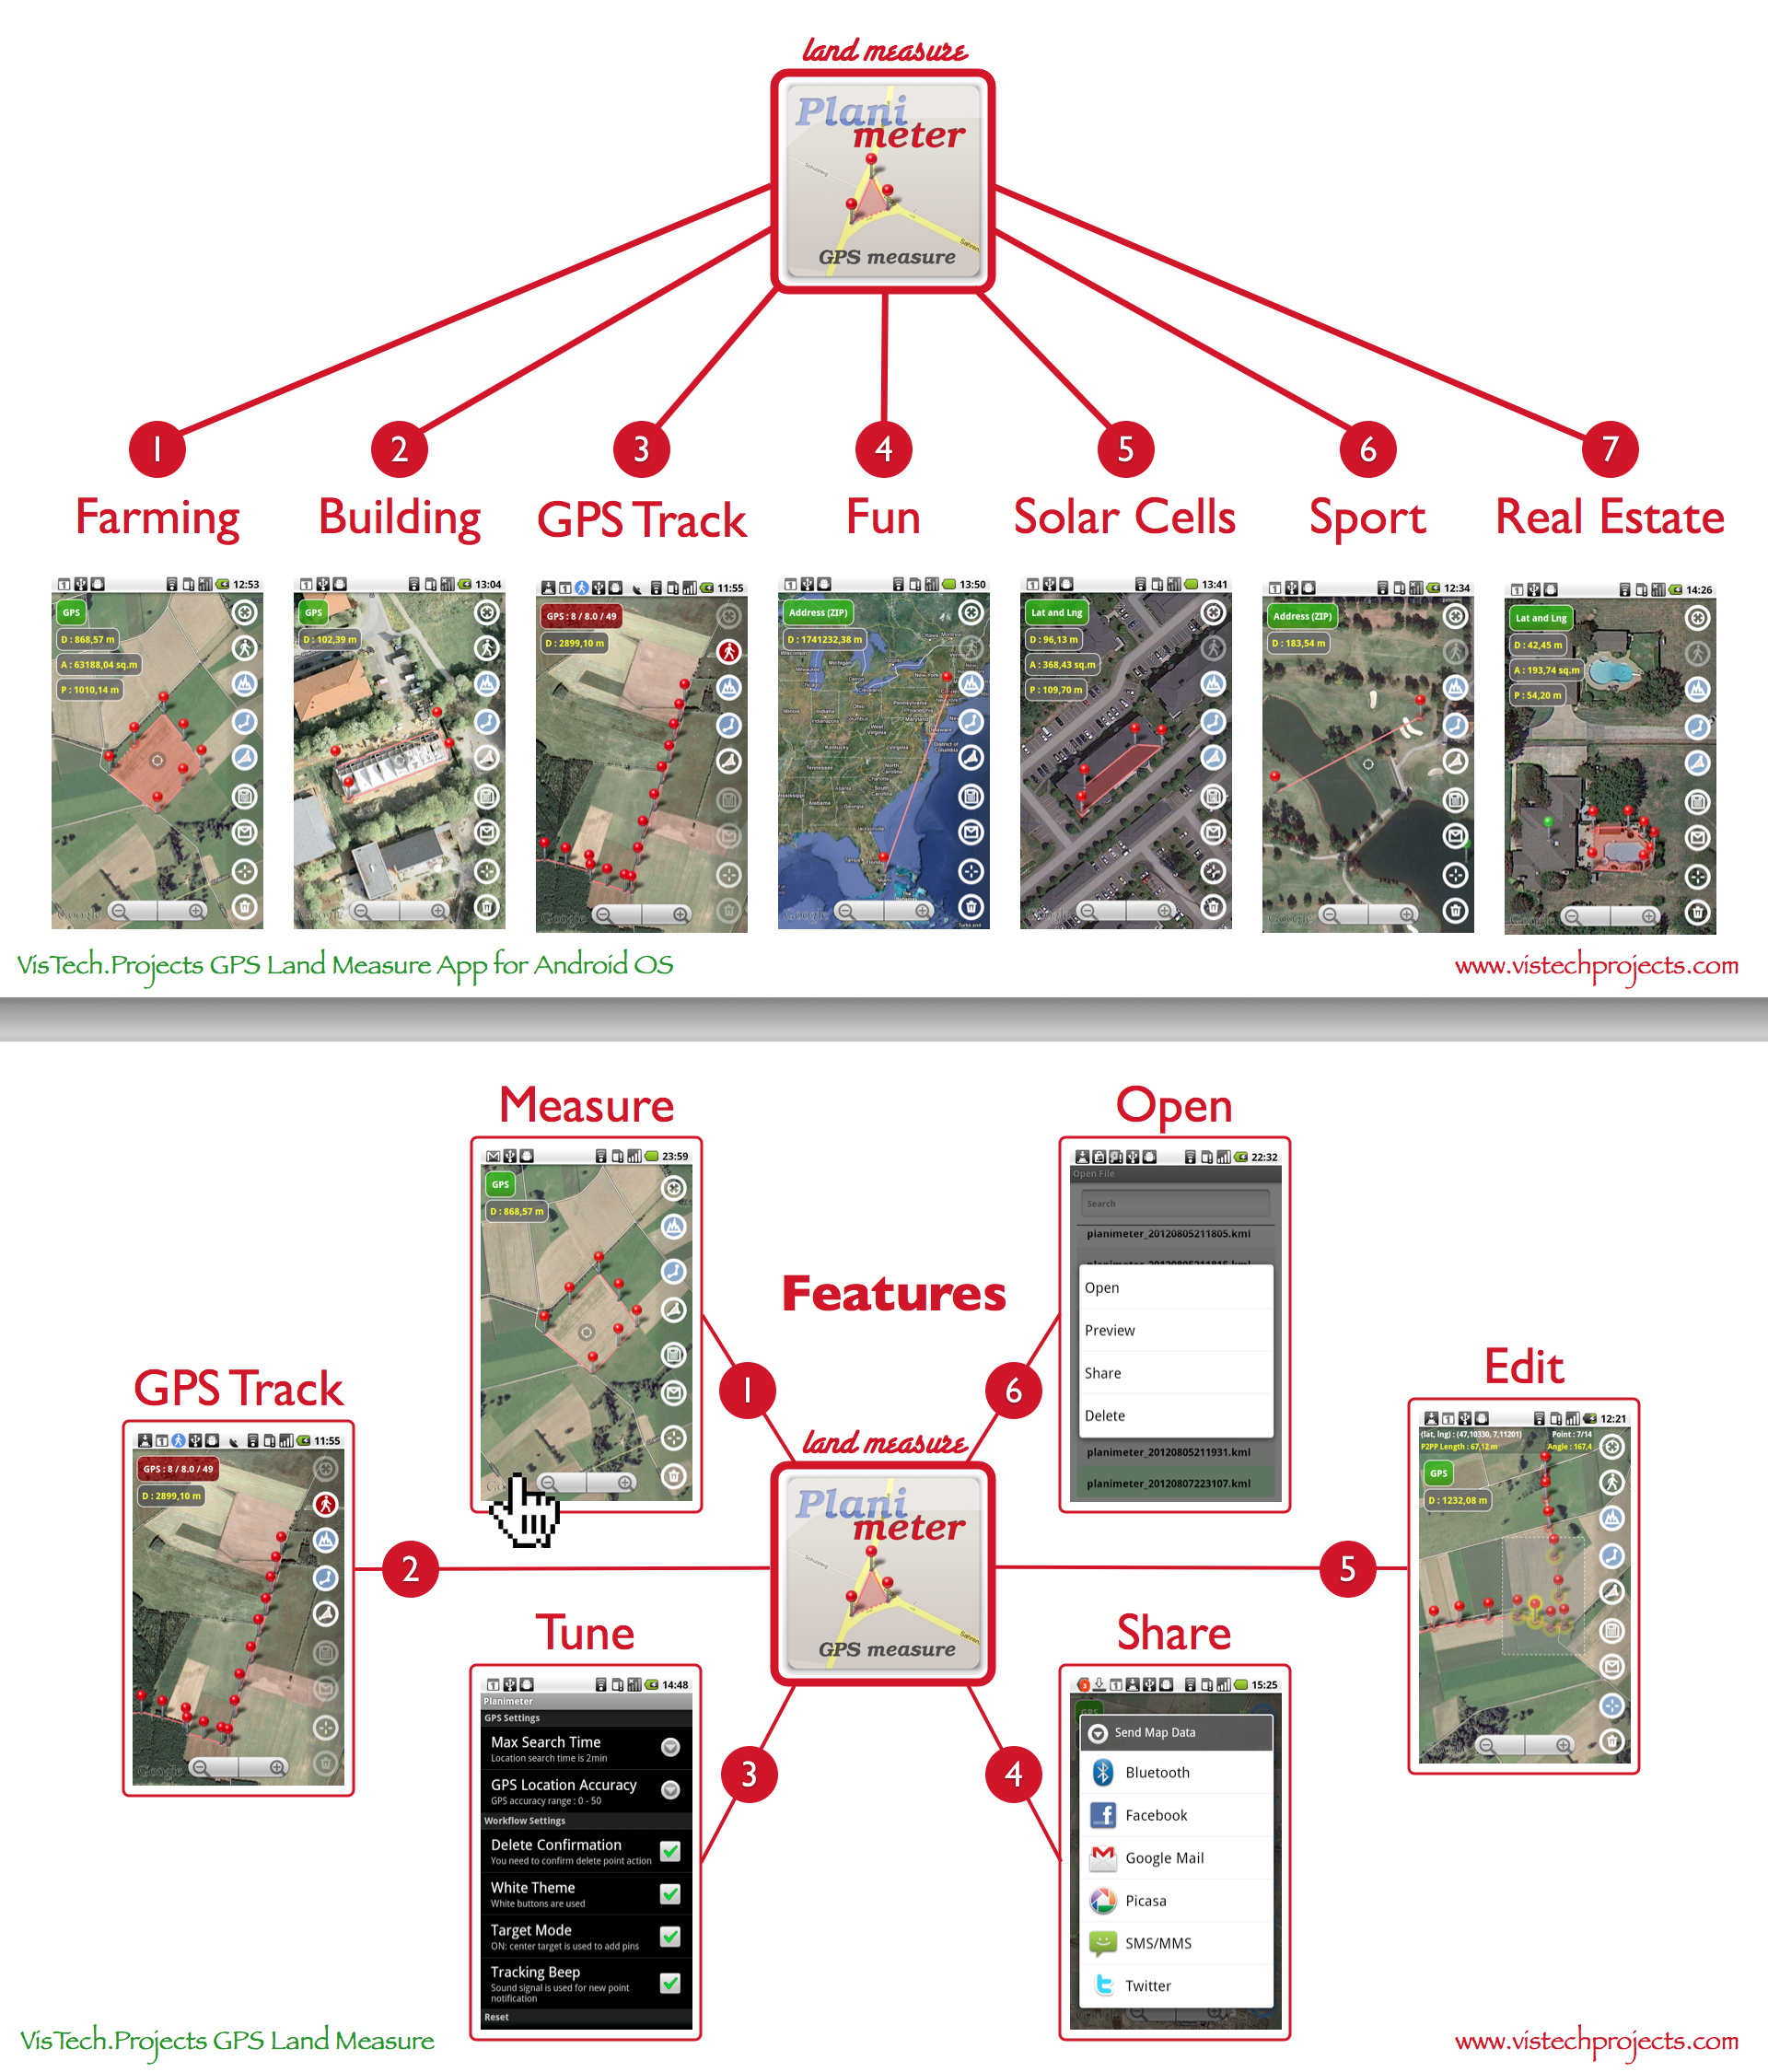 Planimeter - GPS area measure App applications and features